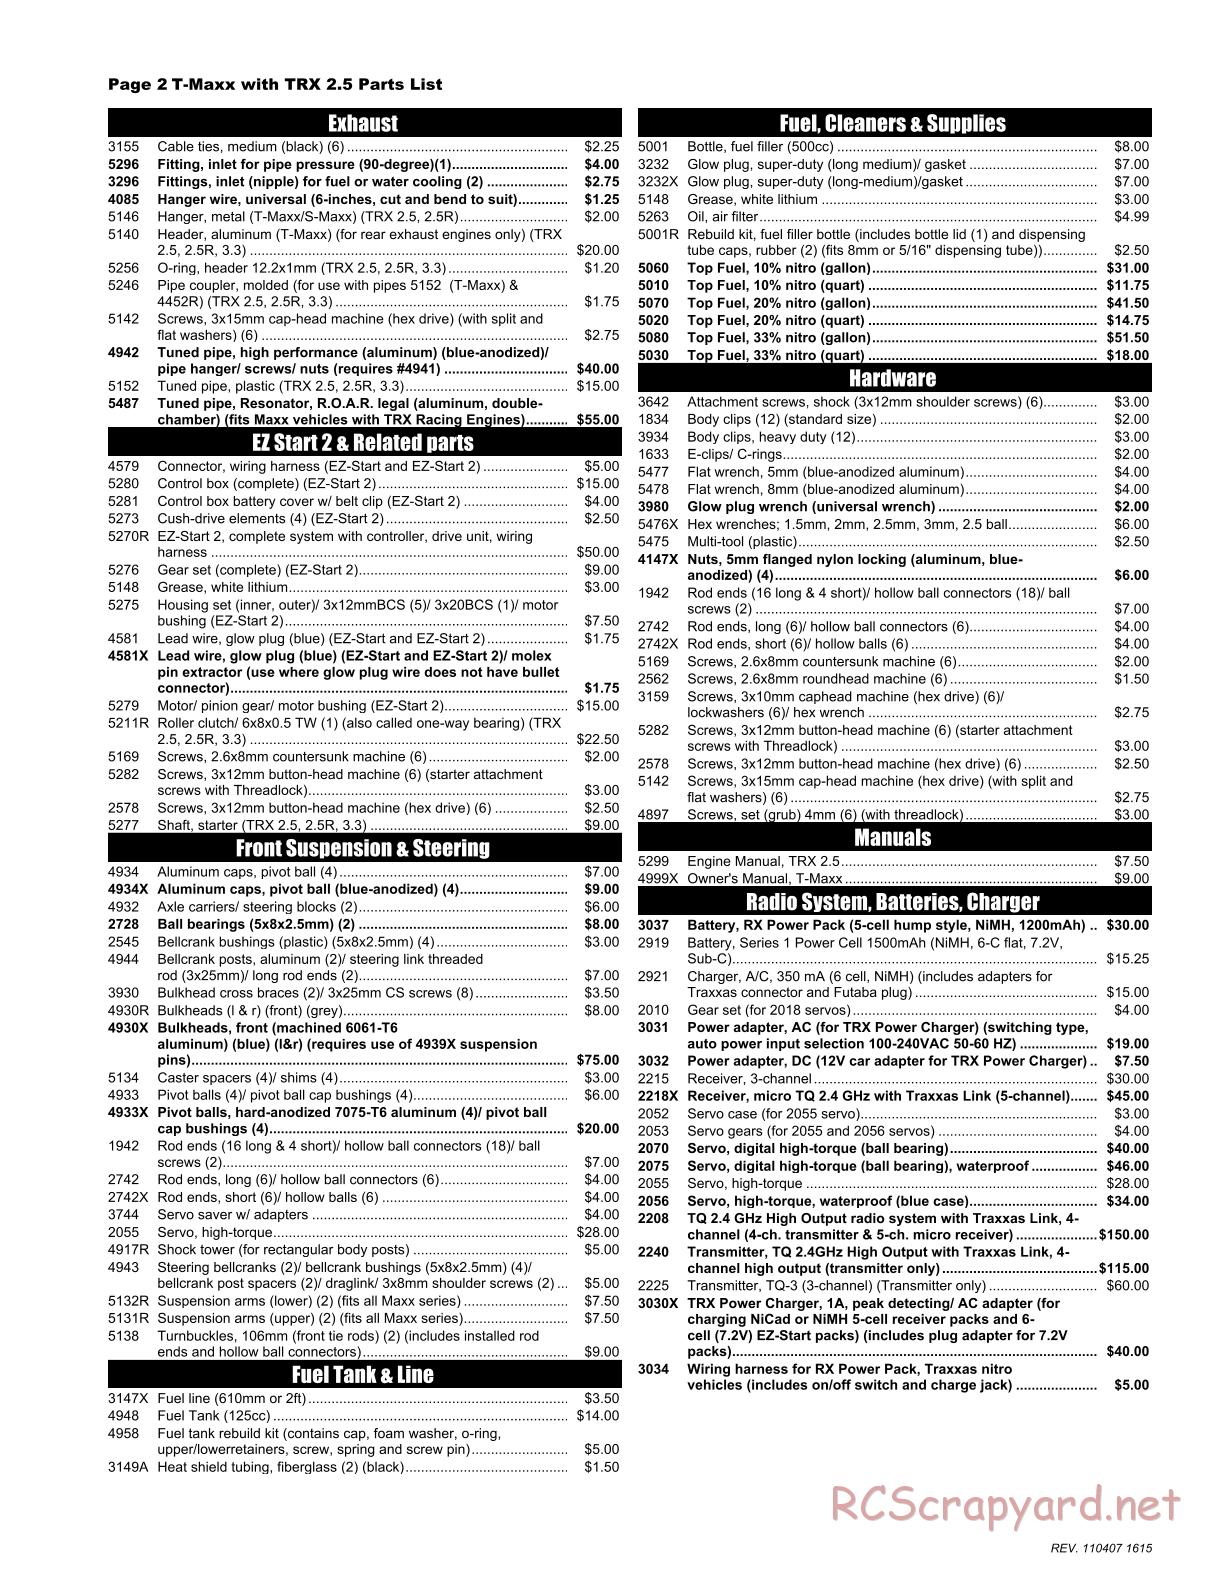 Traxxas - T-Maxx Classic (2008) - Parts List - Page 2